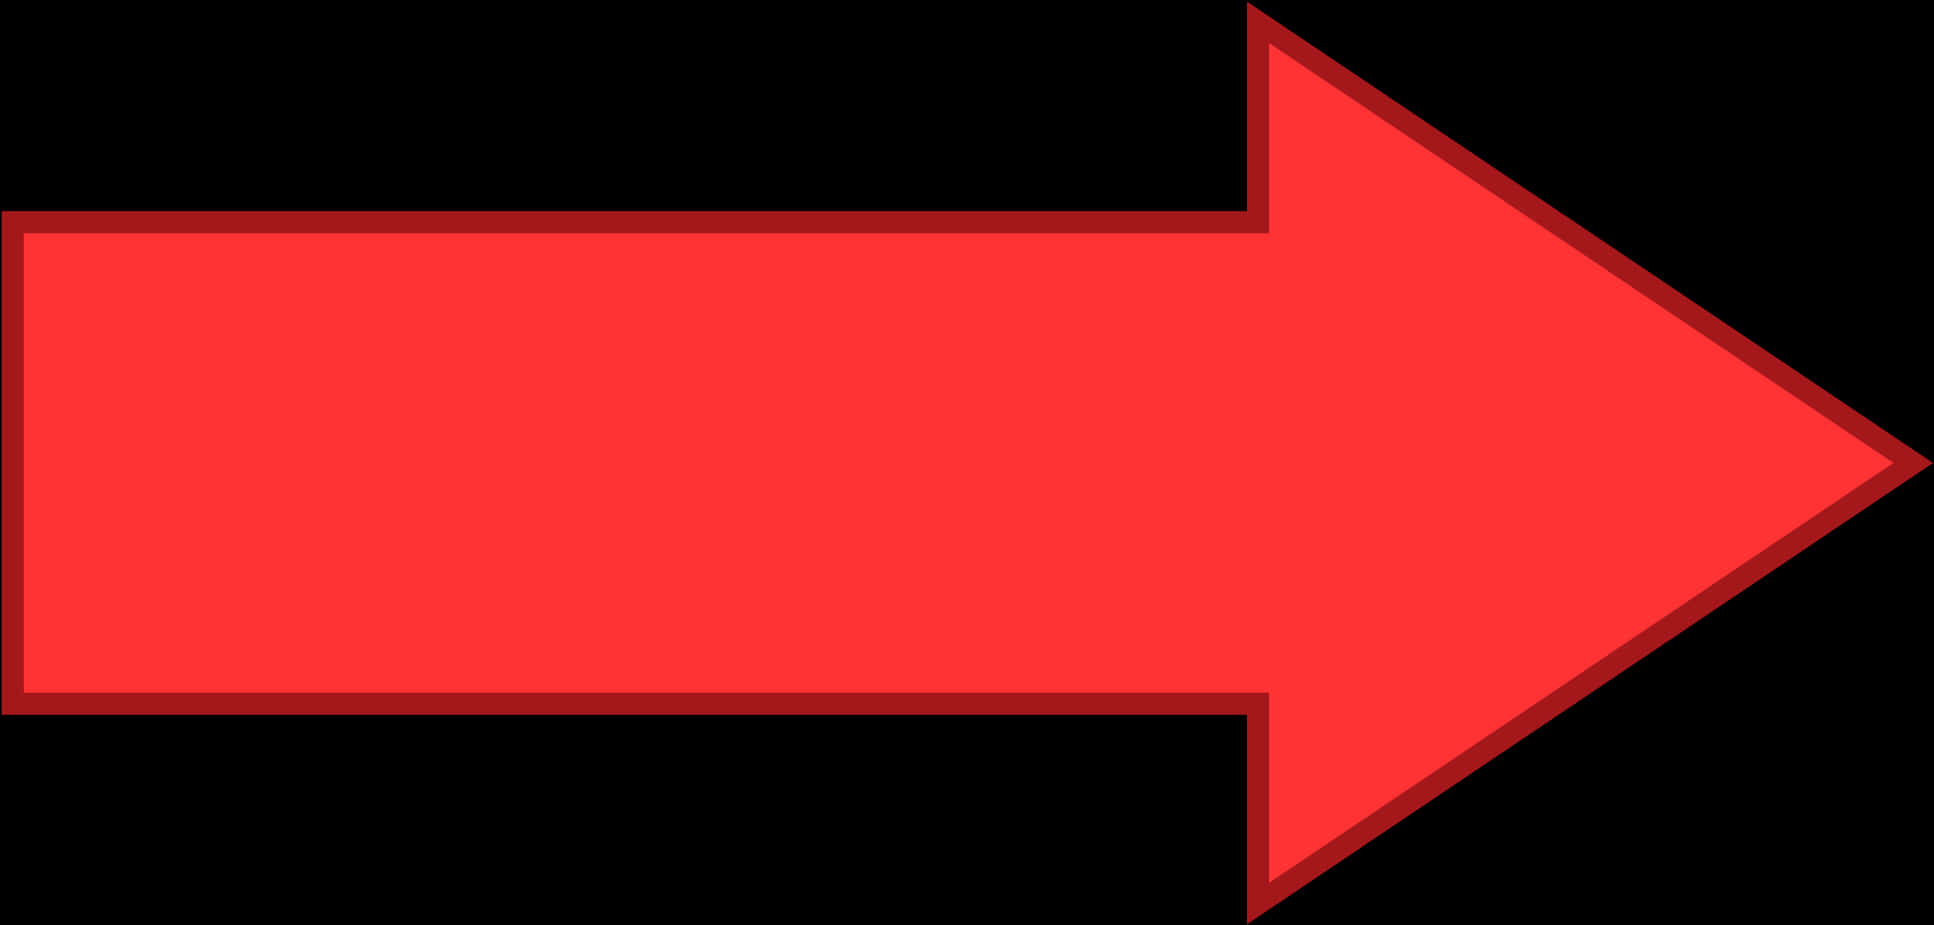 Red Arrow Graphic Direction Indicator